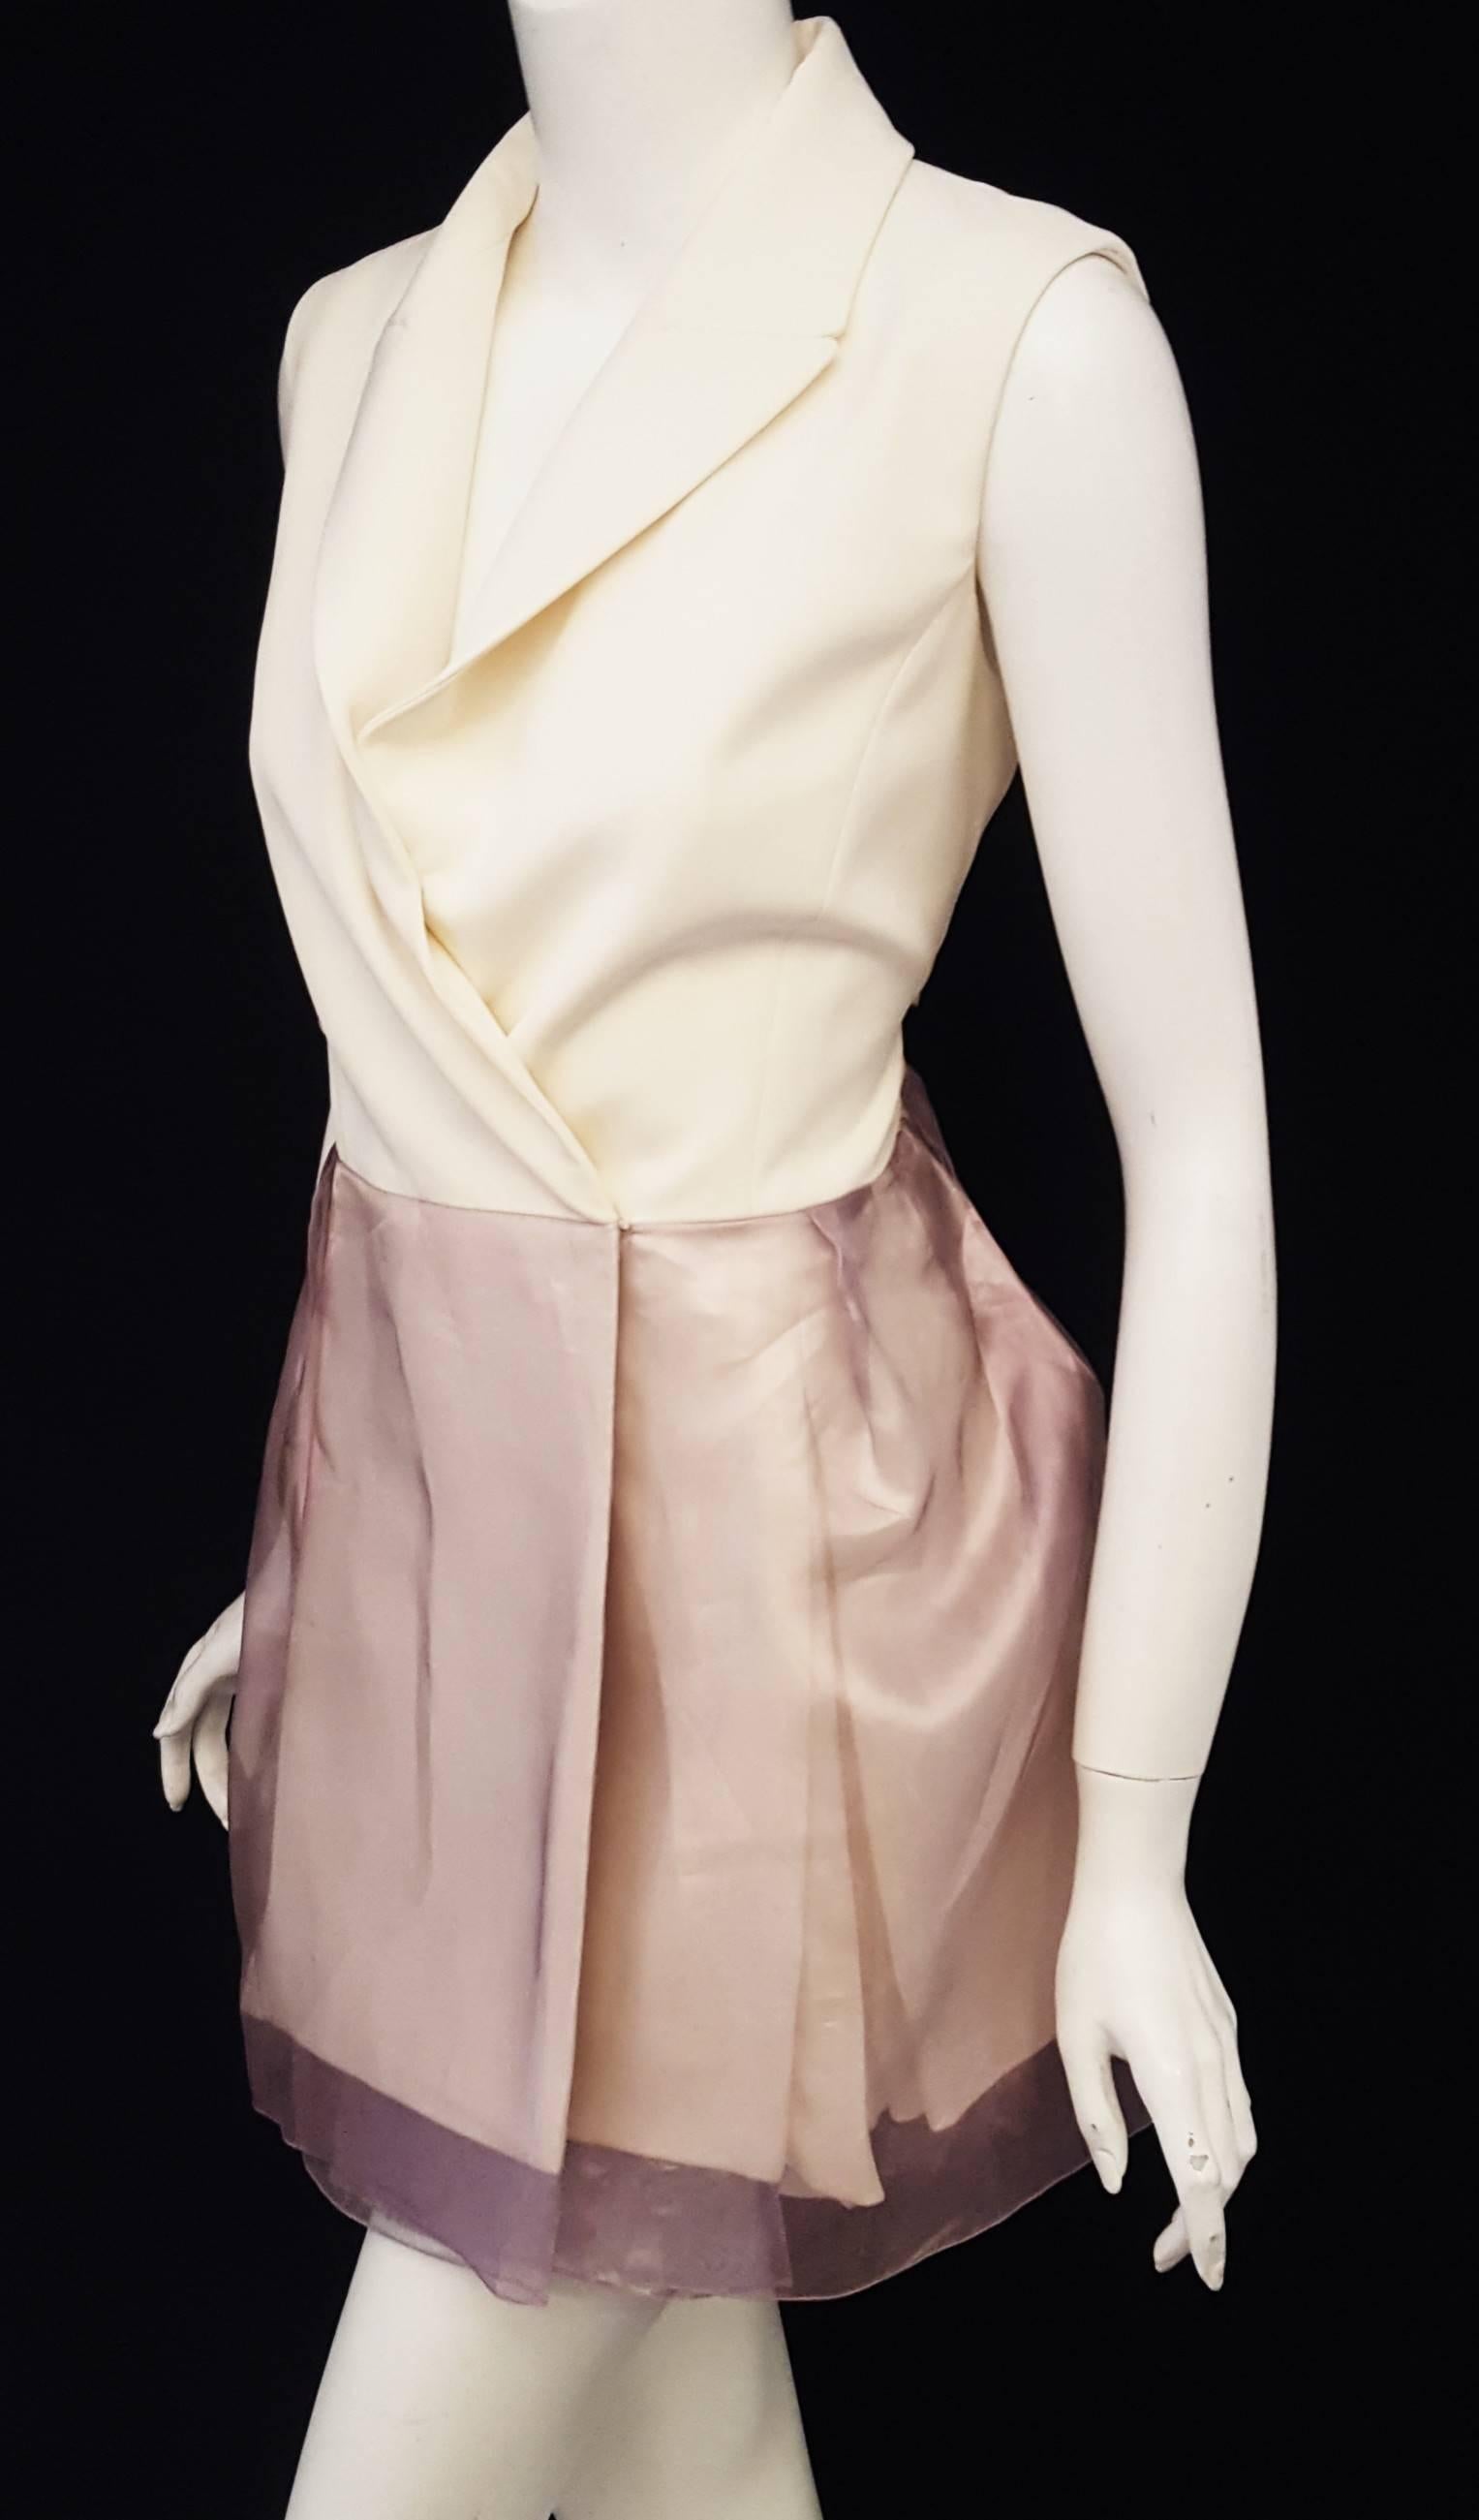 Christian Dior ivory and lavender silk wrap dress is sleeveless with notch collar.  This wrap dress has a silk organza lavender overskirt.  The skirt on the dress contains panels with pleated inserts and is cinched at the waist with 2 hidden buttons